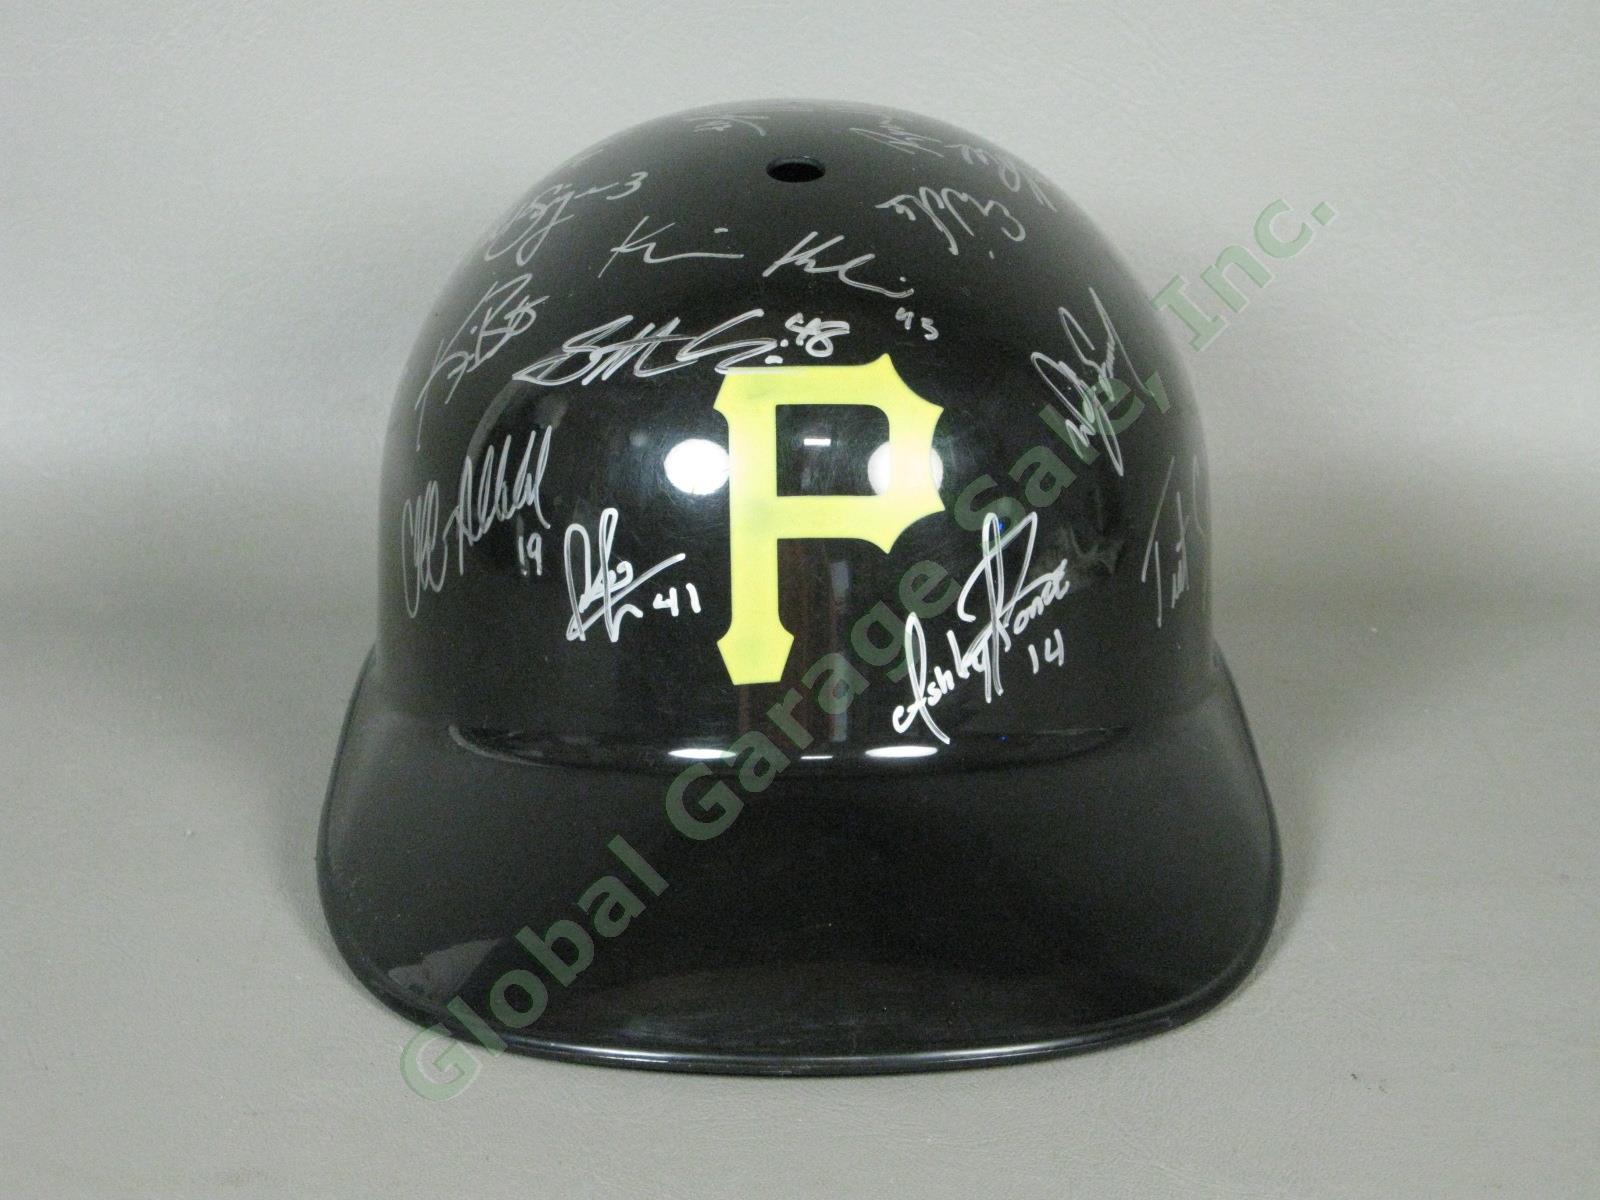 2011 State College Spikes Team Signed Baseball Helmet NYPL Pittsburgh Pirates NR